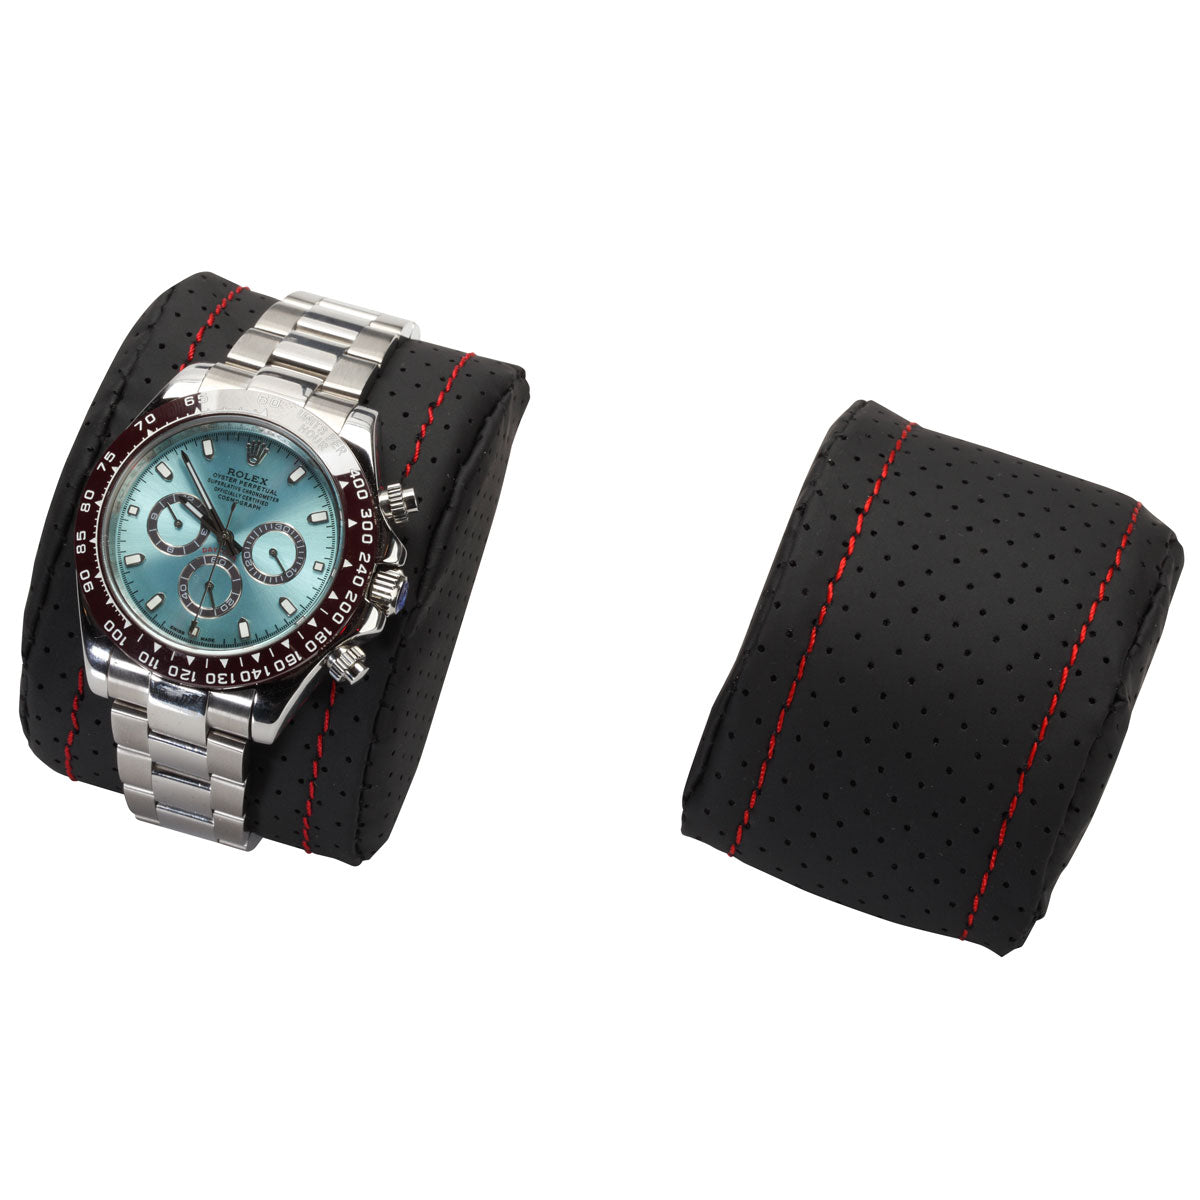 Diplomat "Modena" 10-Watch Glass-Top Cases in Red-Accented Carbon Fiber